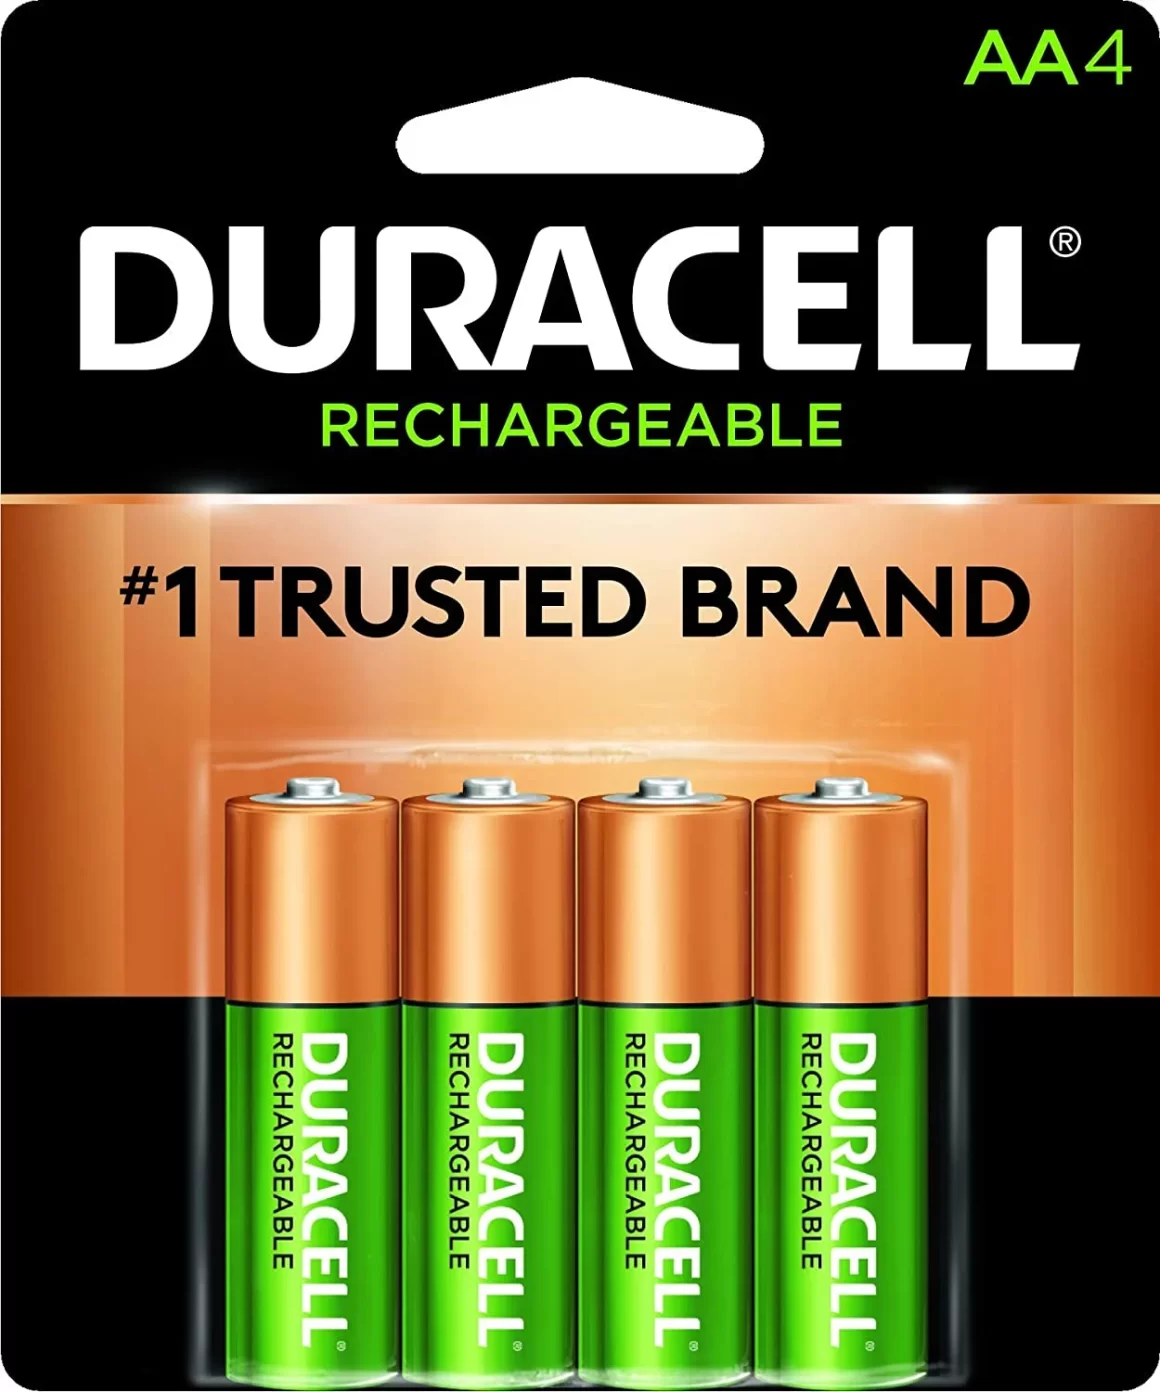 71F9Y8y9V1L. AC SL1500  1160x1392 - 5 Best rechargeable batteries you can buy in 2023